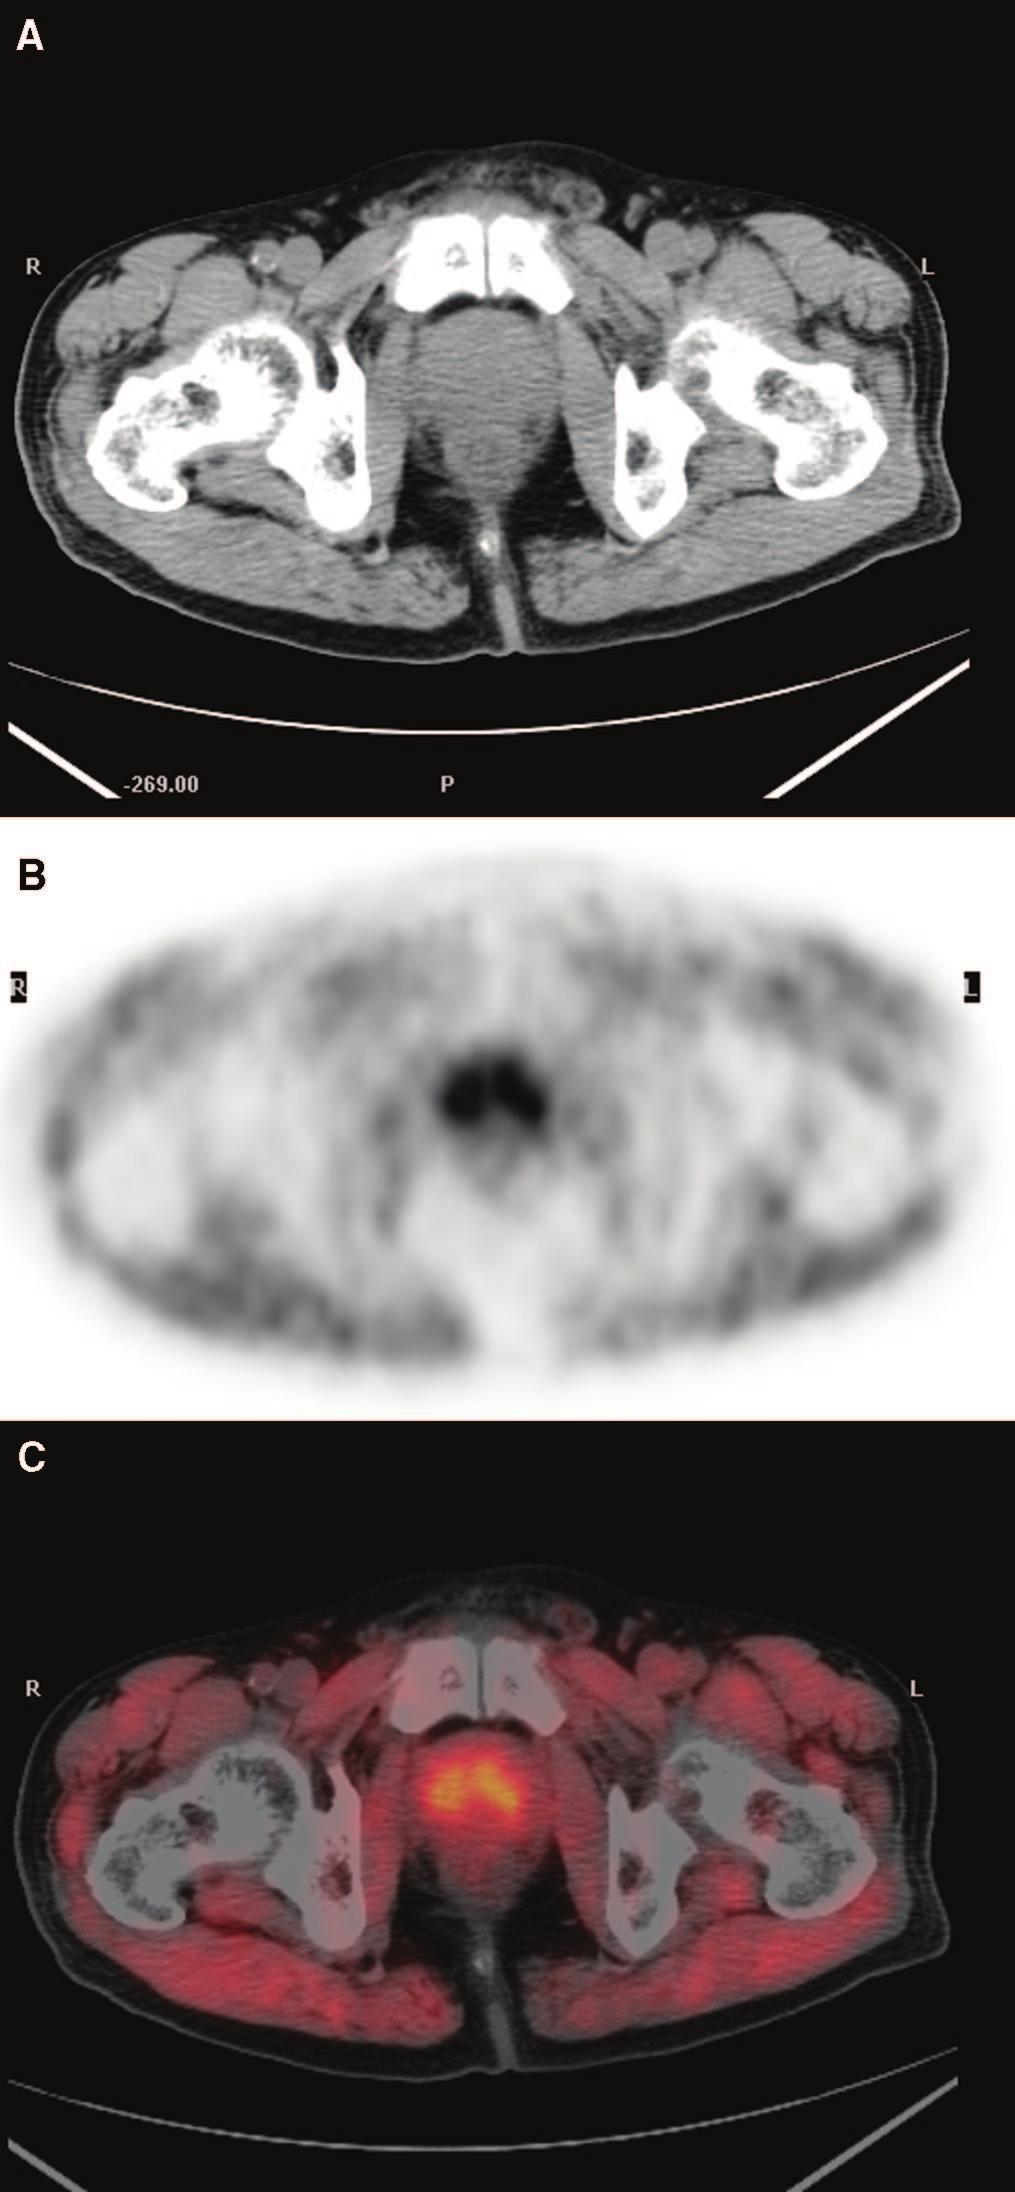 Li et al Clinical Nuclear Medicine Volume 33, Number 10, October 2008 FIGURE 3. C-11 choline transaxial PET/CT image of a 70- year-old patient with BPH (PSA 5.42 g/l).